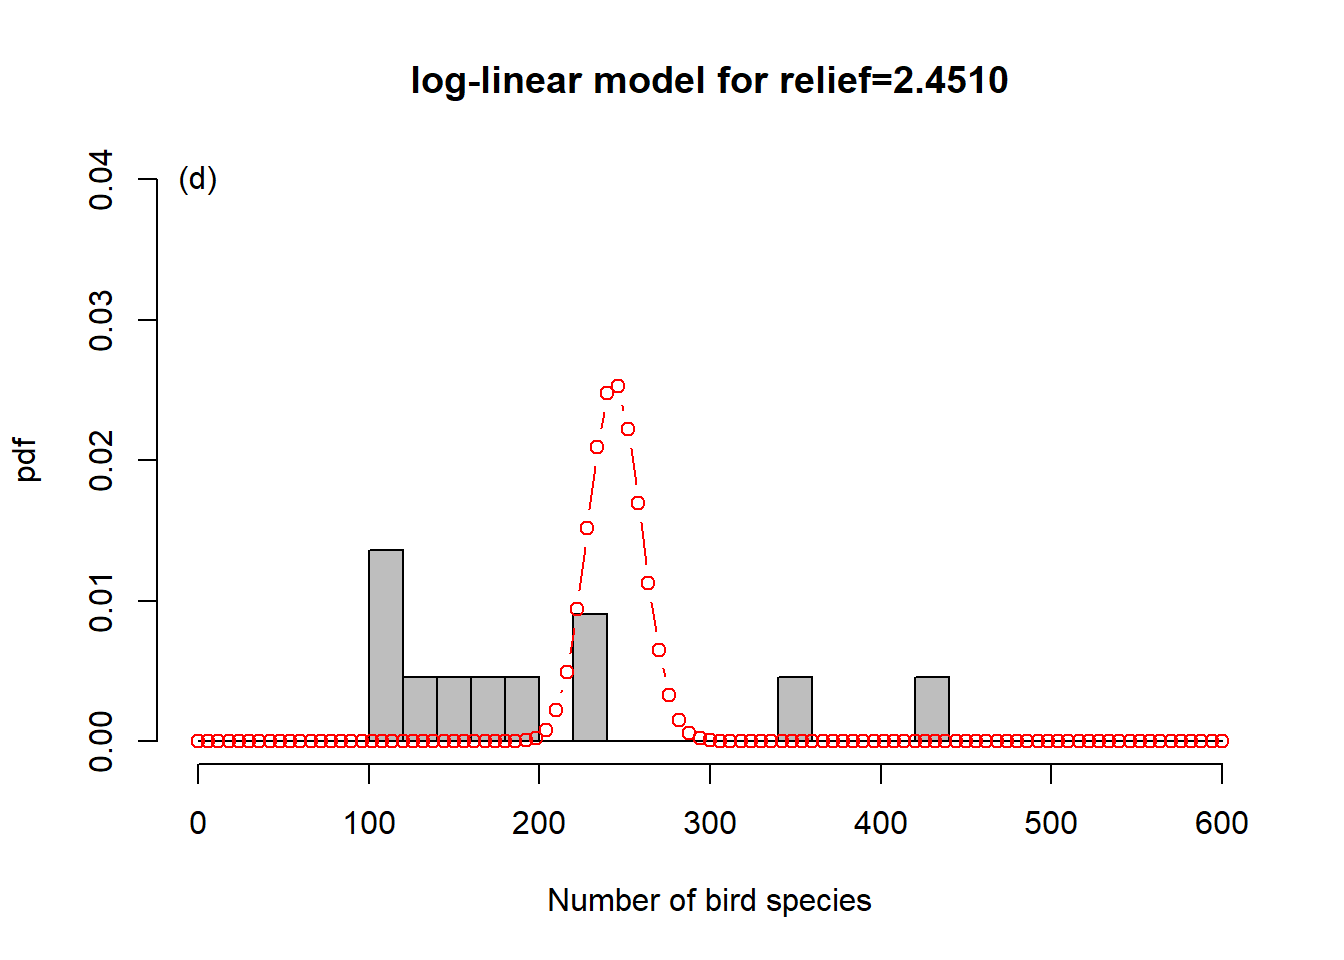 Illustration of log-linear regression with the birds example. (a) One overall Poisson distribution fitted to the data; equivalent to log-linear regression with an intercept only. This clearly does not capture the variation in the data. (b)-(e) Individual Poisson distributions for the four relief levels (compare Figure \@ref(fig:loglin)) as estimated by log-linear regression with relief as predictor. (f) Overall distribution estimated by the log-linear model, obtained by averaging the four individual distributions. This is clearly better at capturing the variation in the data, the predictor "relief" explains some of that variation, but the model is still underestimating the increase in variance with increasing mean response, e.g. (d)-(e). The data are _over-dispersed_ with respect to the Poisson process (see Chapter \@ref(overdisp)).